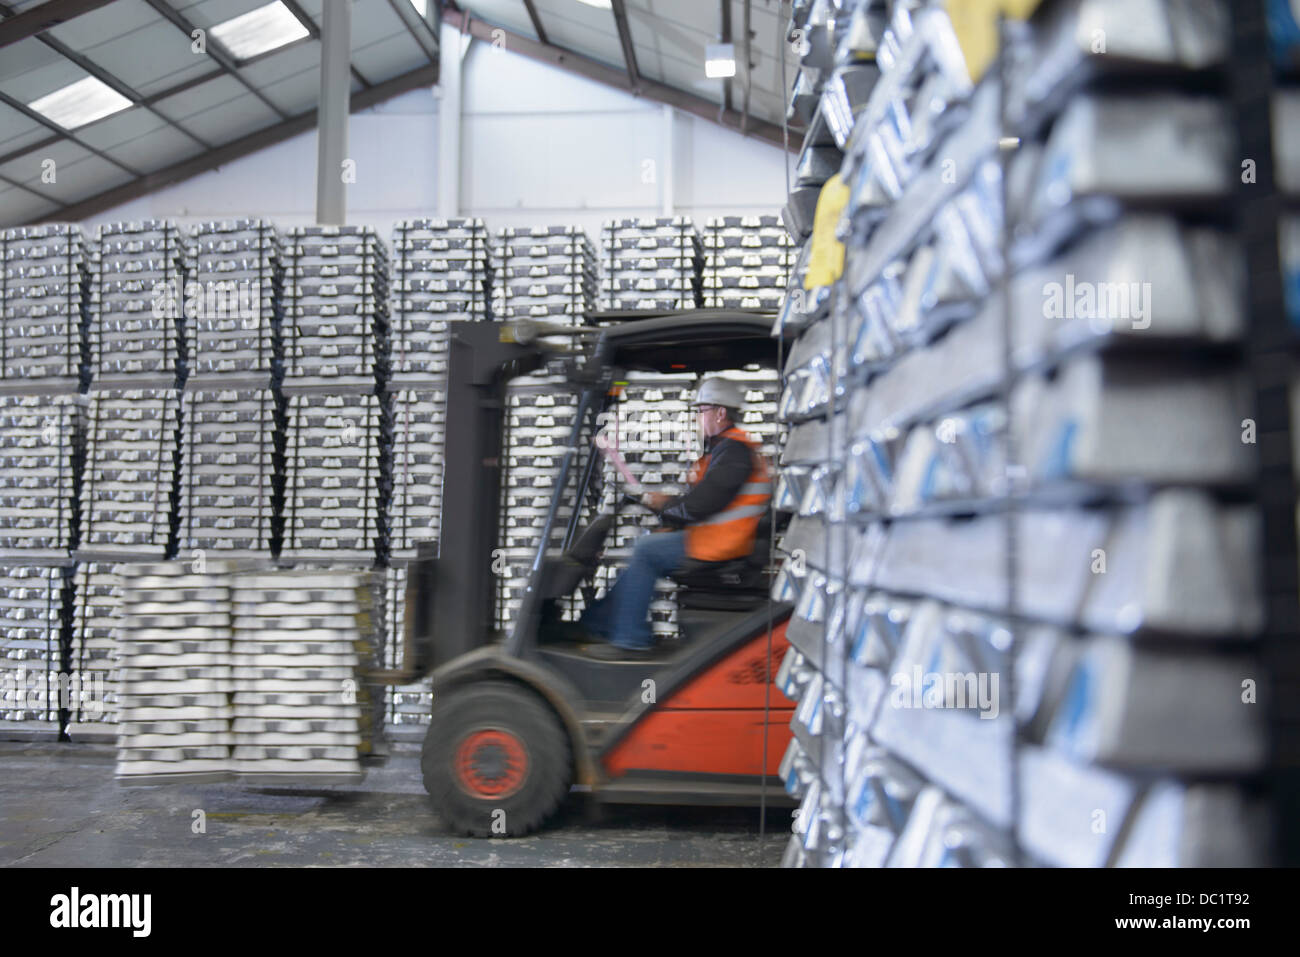 Forklift truck moving stock in warehouse Stock Photo